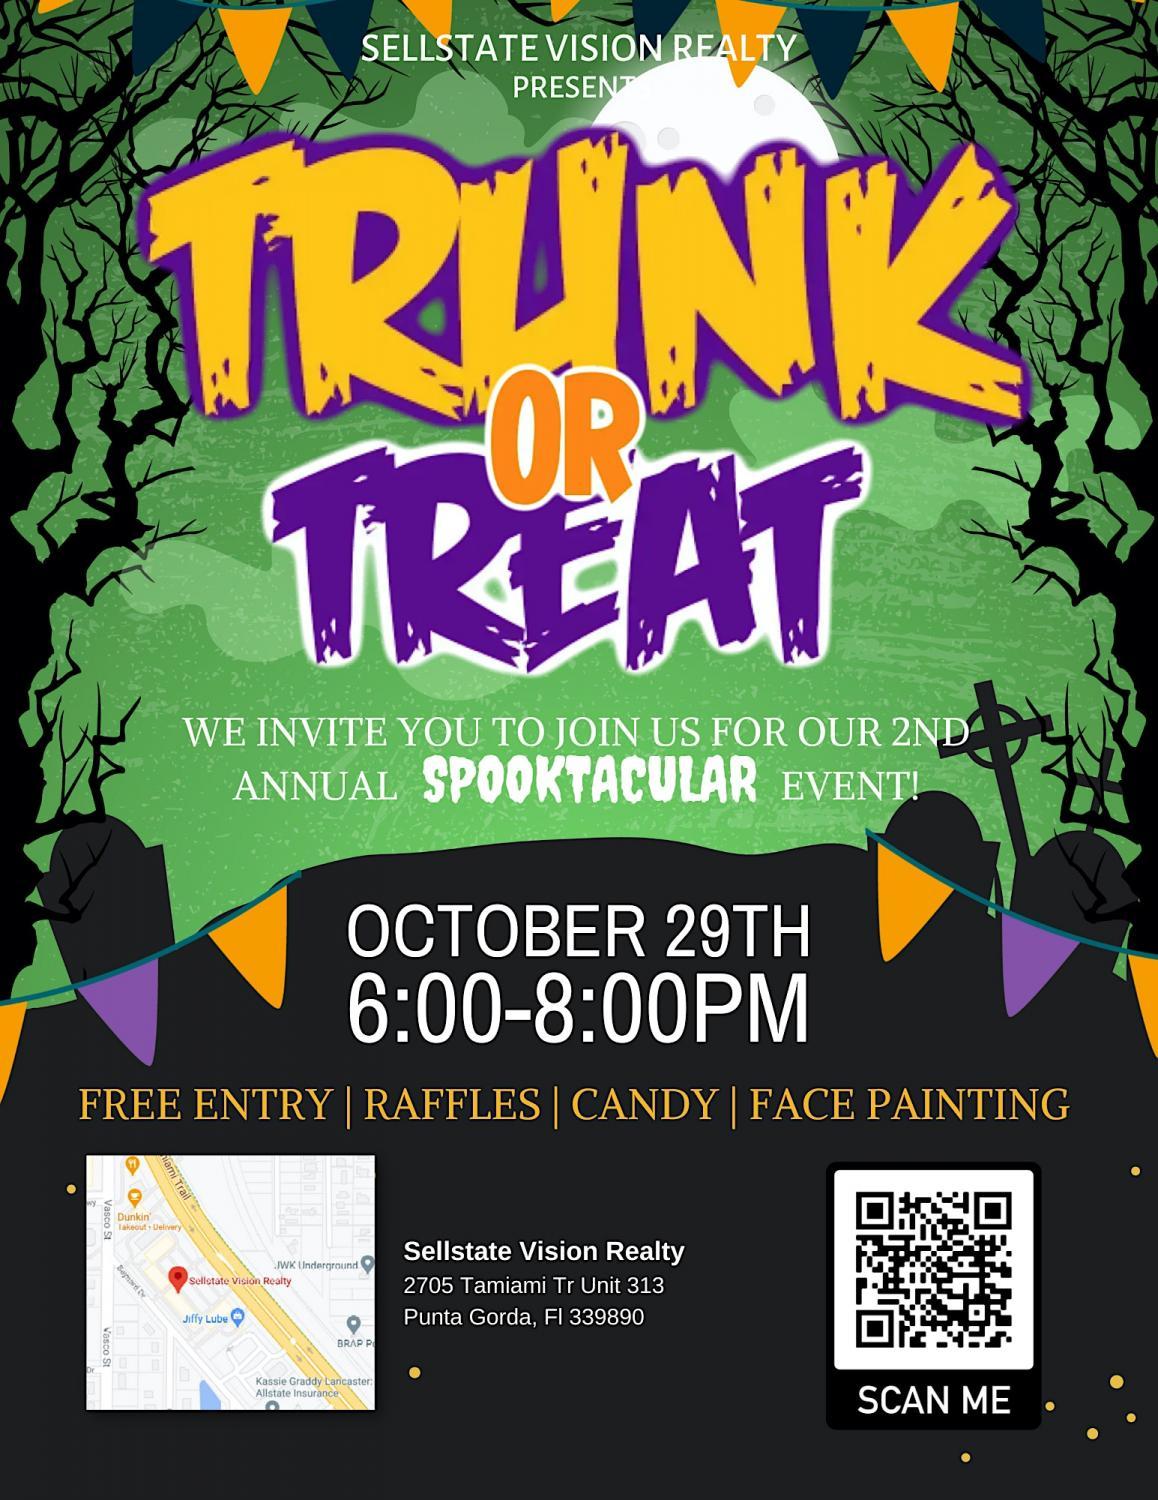 Second Annual Trunk Or Treat Spooktacular
Sat Oct 29, 7:00 PM - Sat Oct 29, 7:00 PM
in 10 days